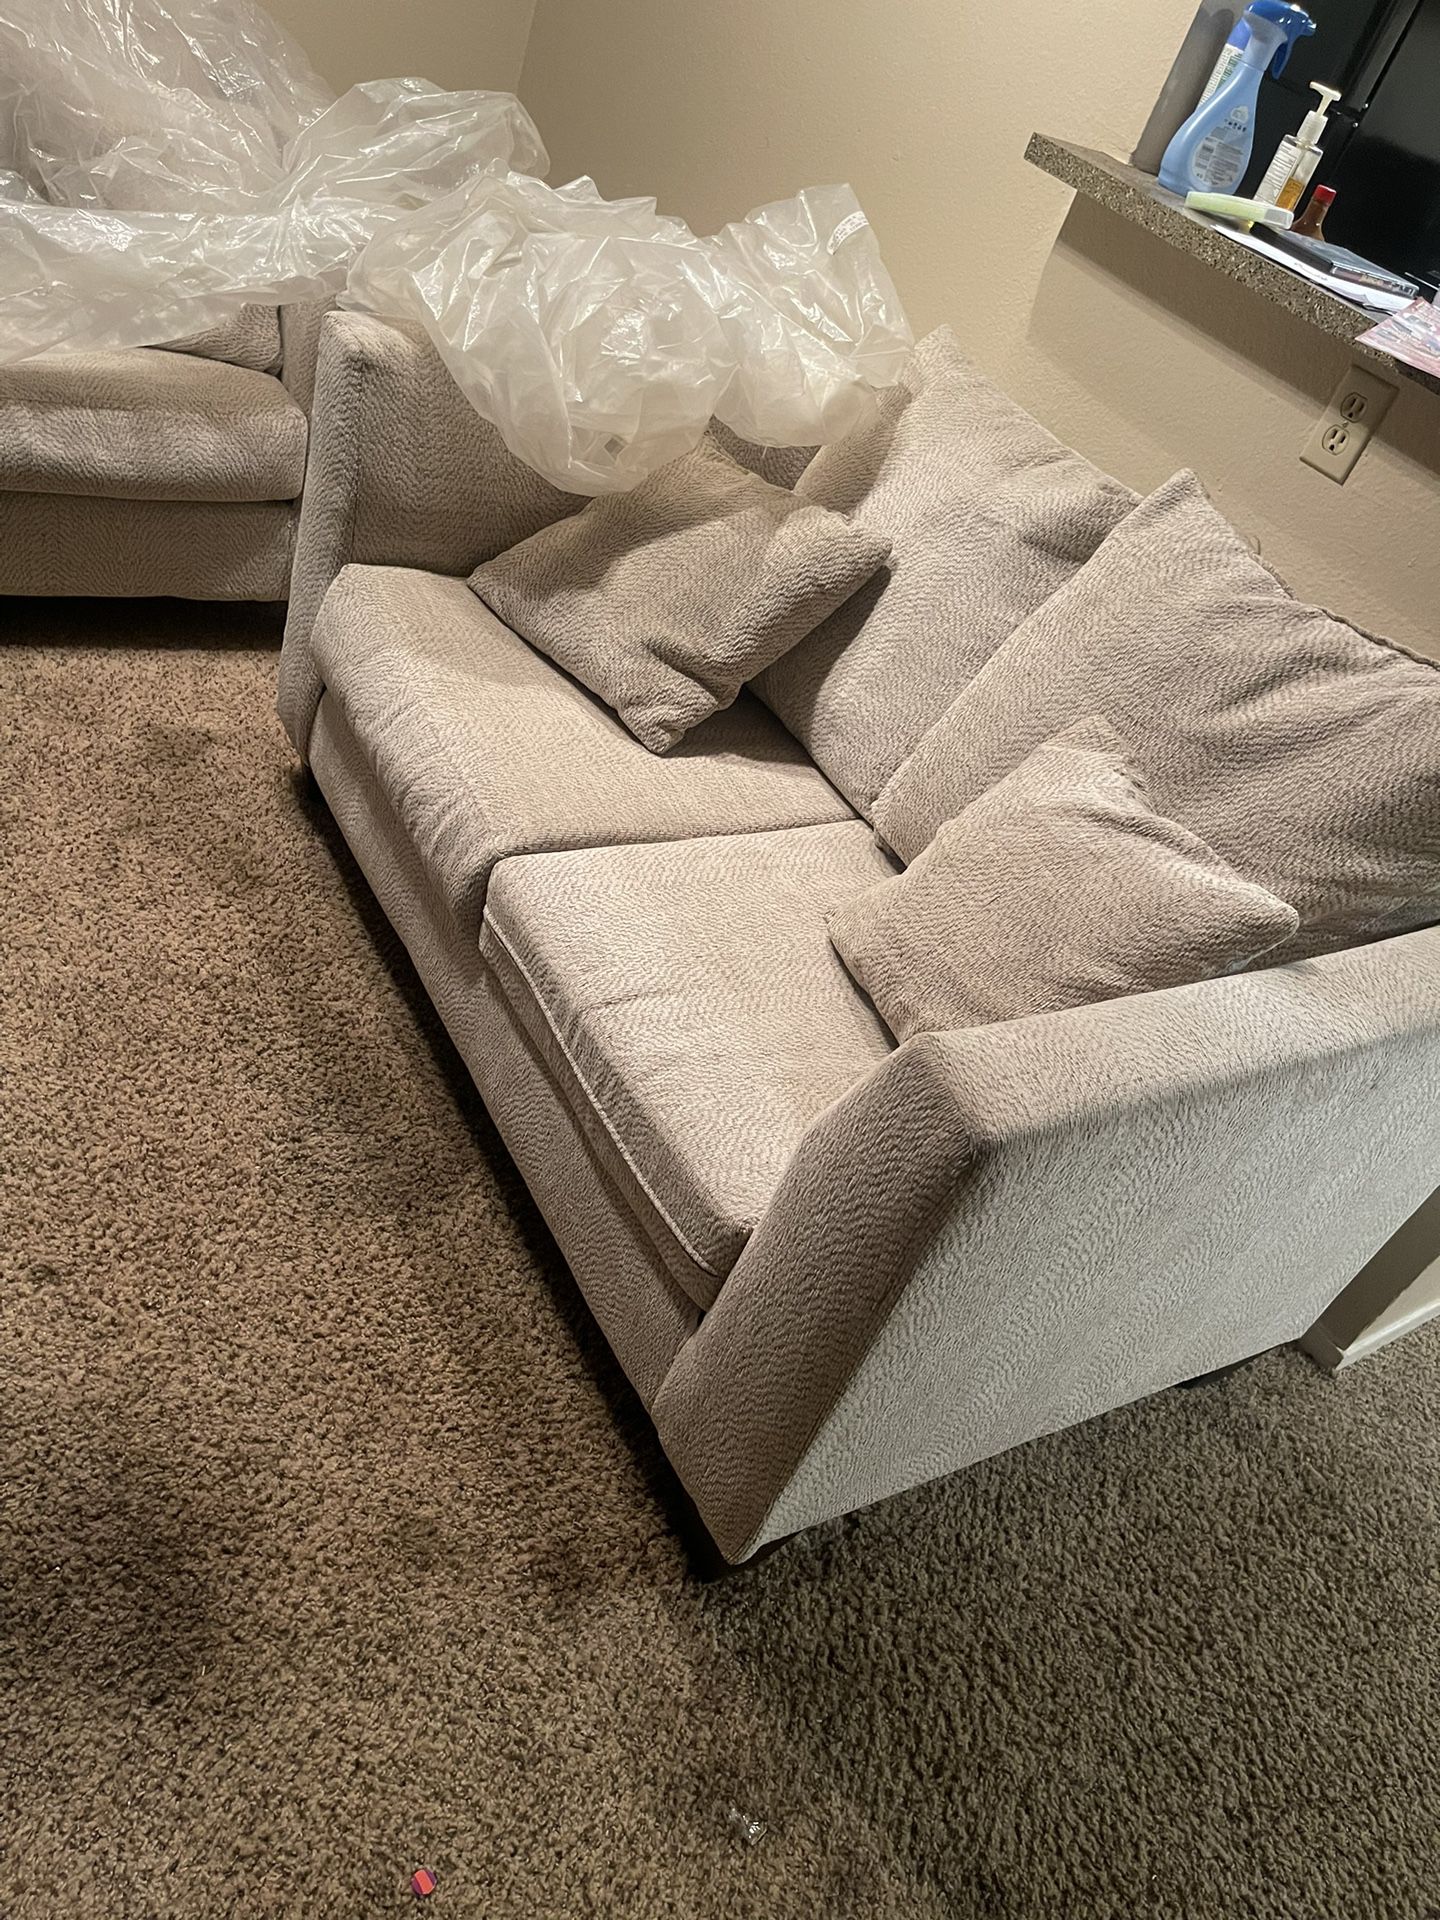 2 Couches Brand New 